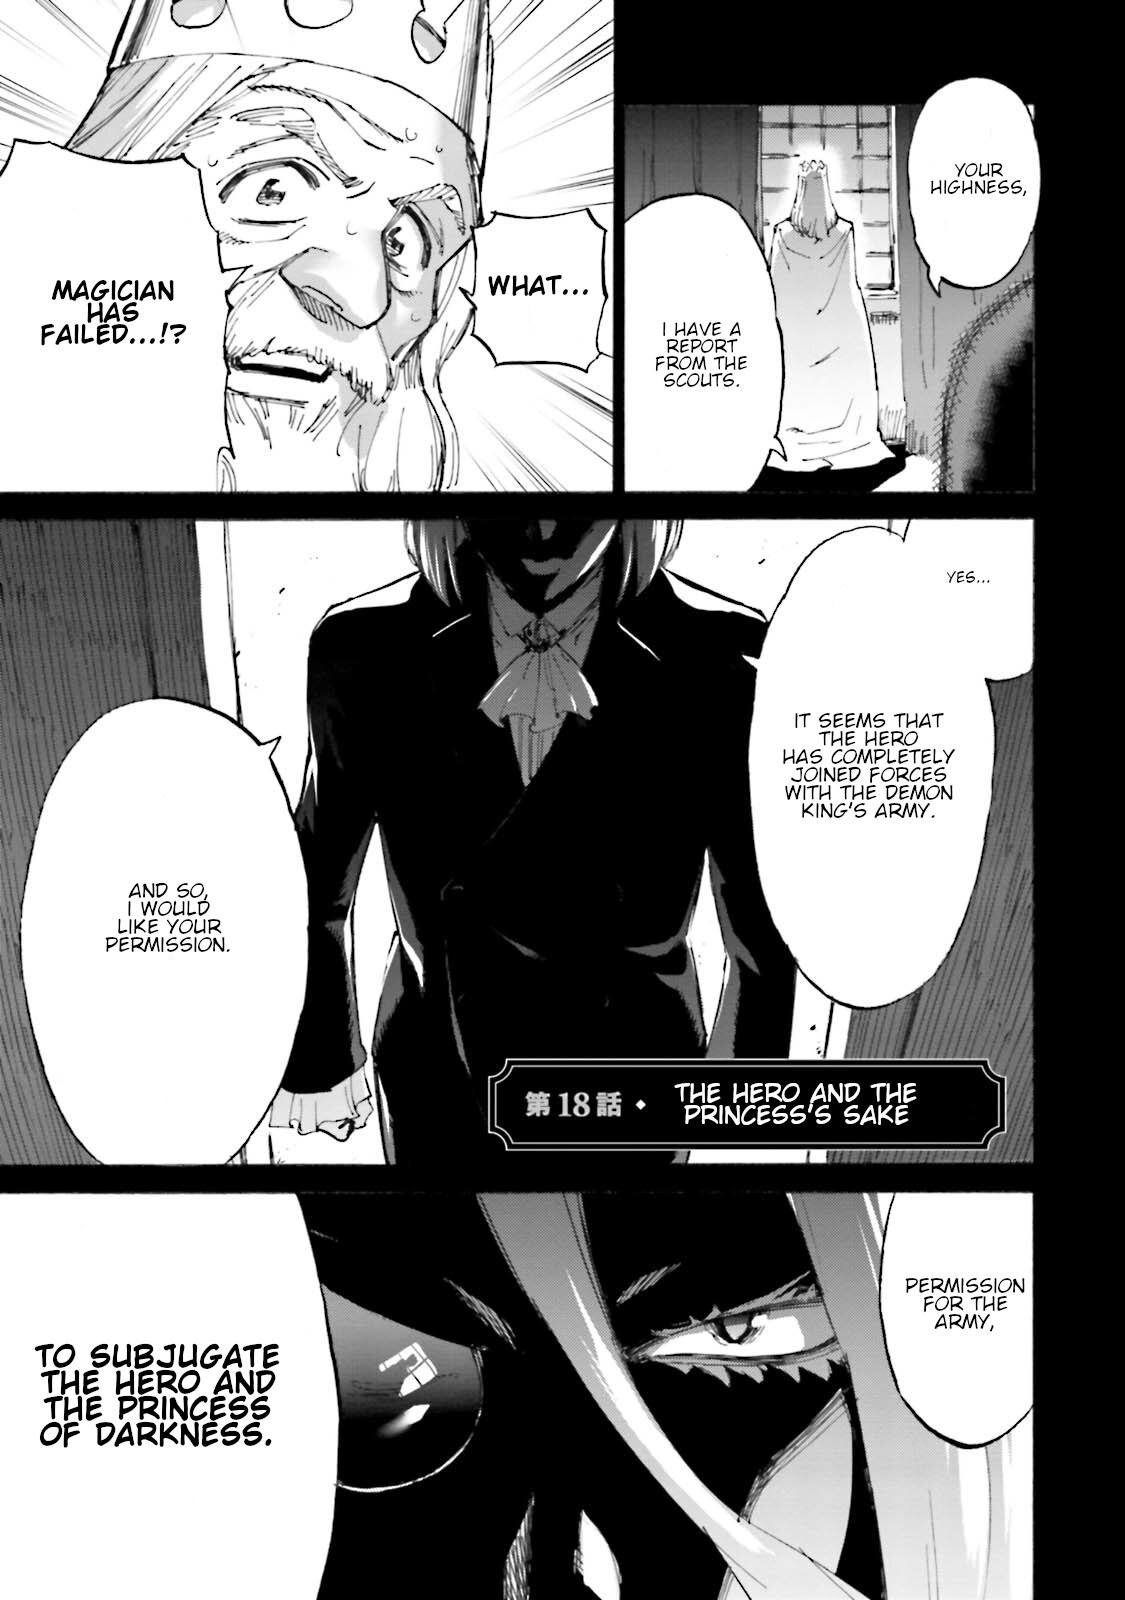 The Hero And The Demon King's Romcom Vol.3 Chapter 18: The Hero And The Princess's Sake - Picture 1